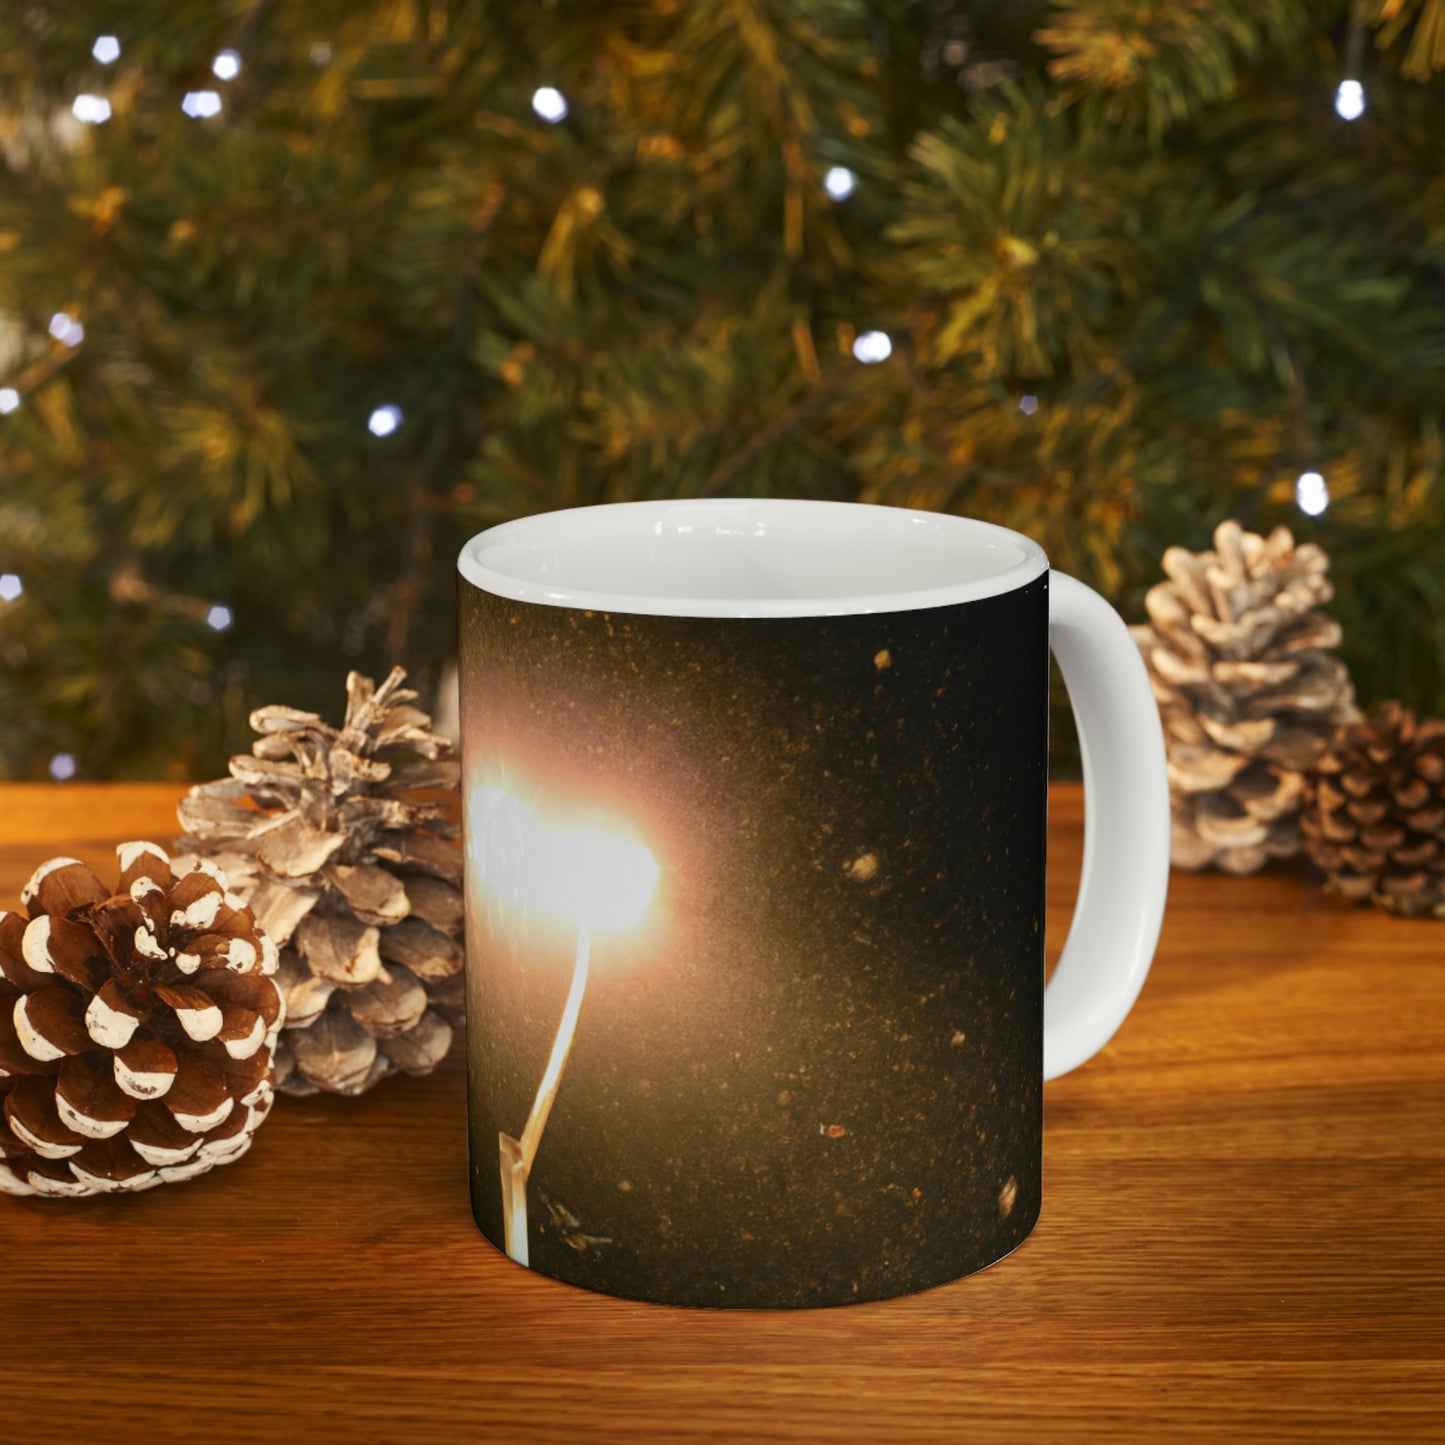 Winter's Lonely Lullaby - The Alien Taza de cerámica 11 oz